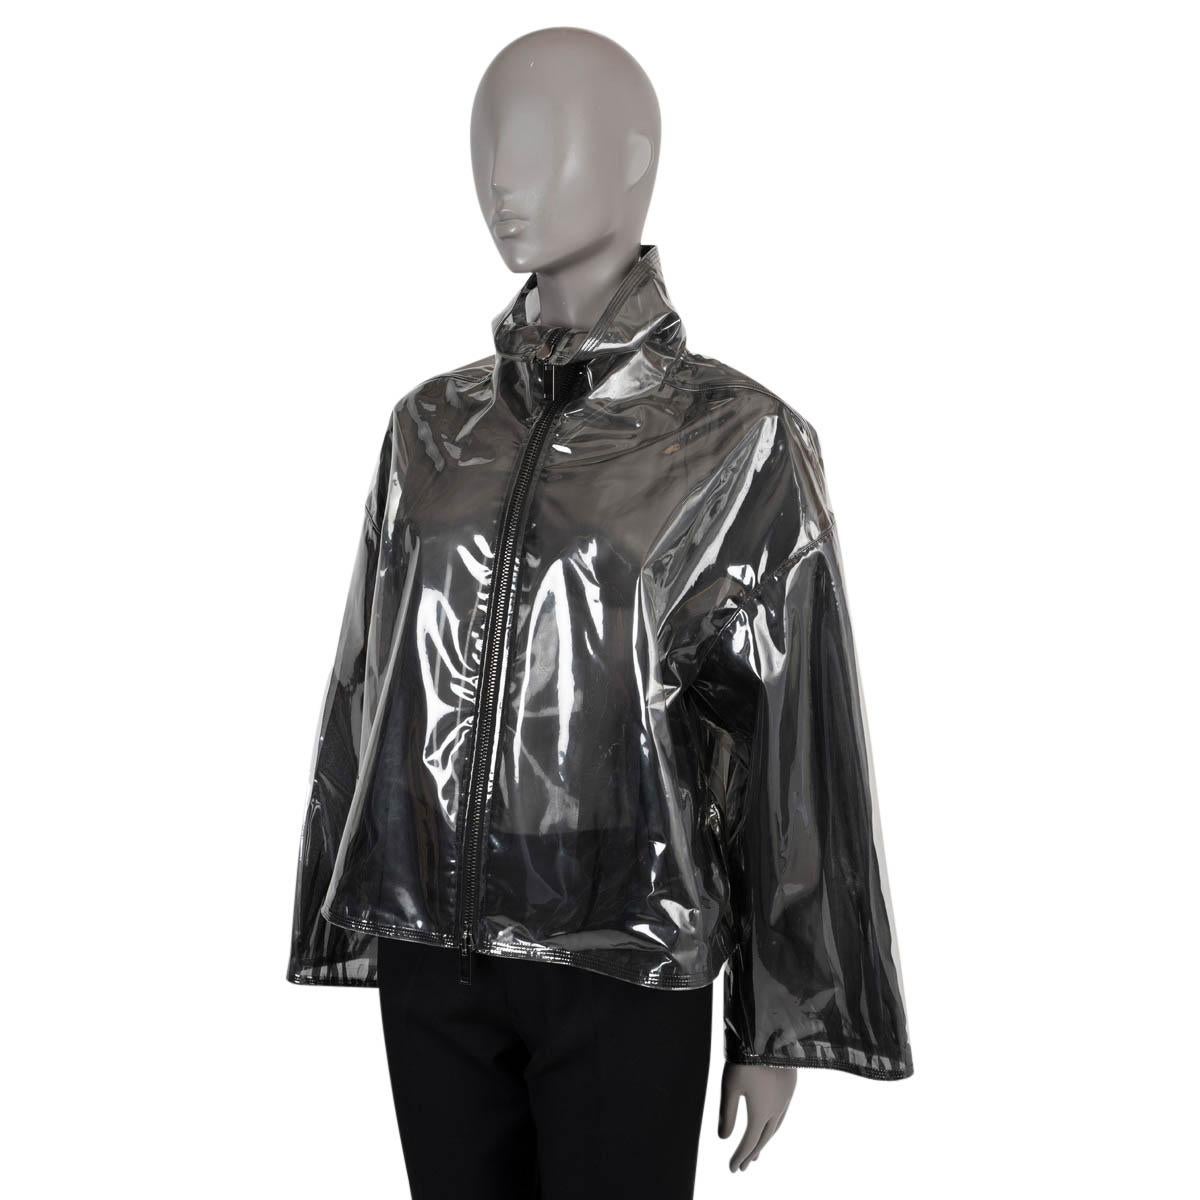 100% authentic Valentino vinyl jacket in clear polyurethane (100%). Features a high standing collar and side pockets. Closes within zipper on the front and is lined in black silk (100%). Has been worn and is in excellent condition.

2018